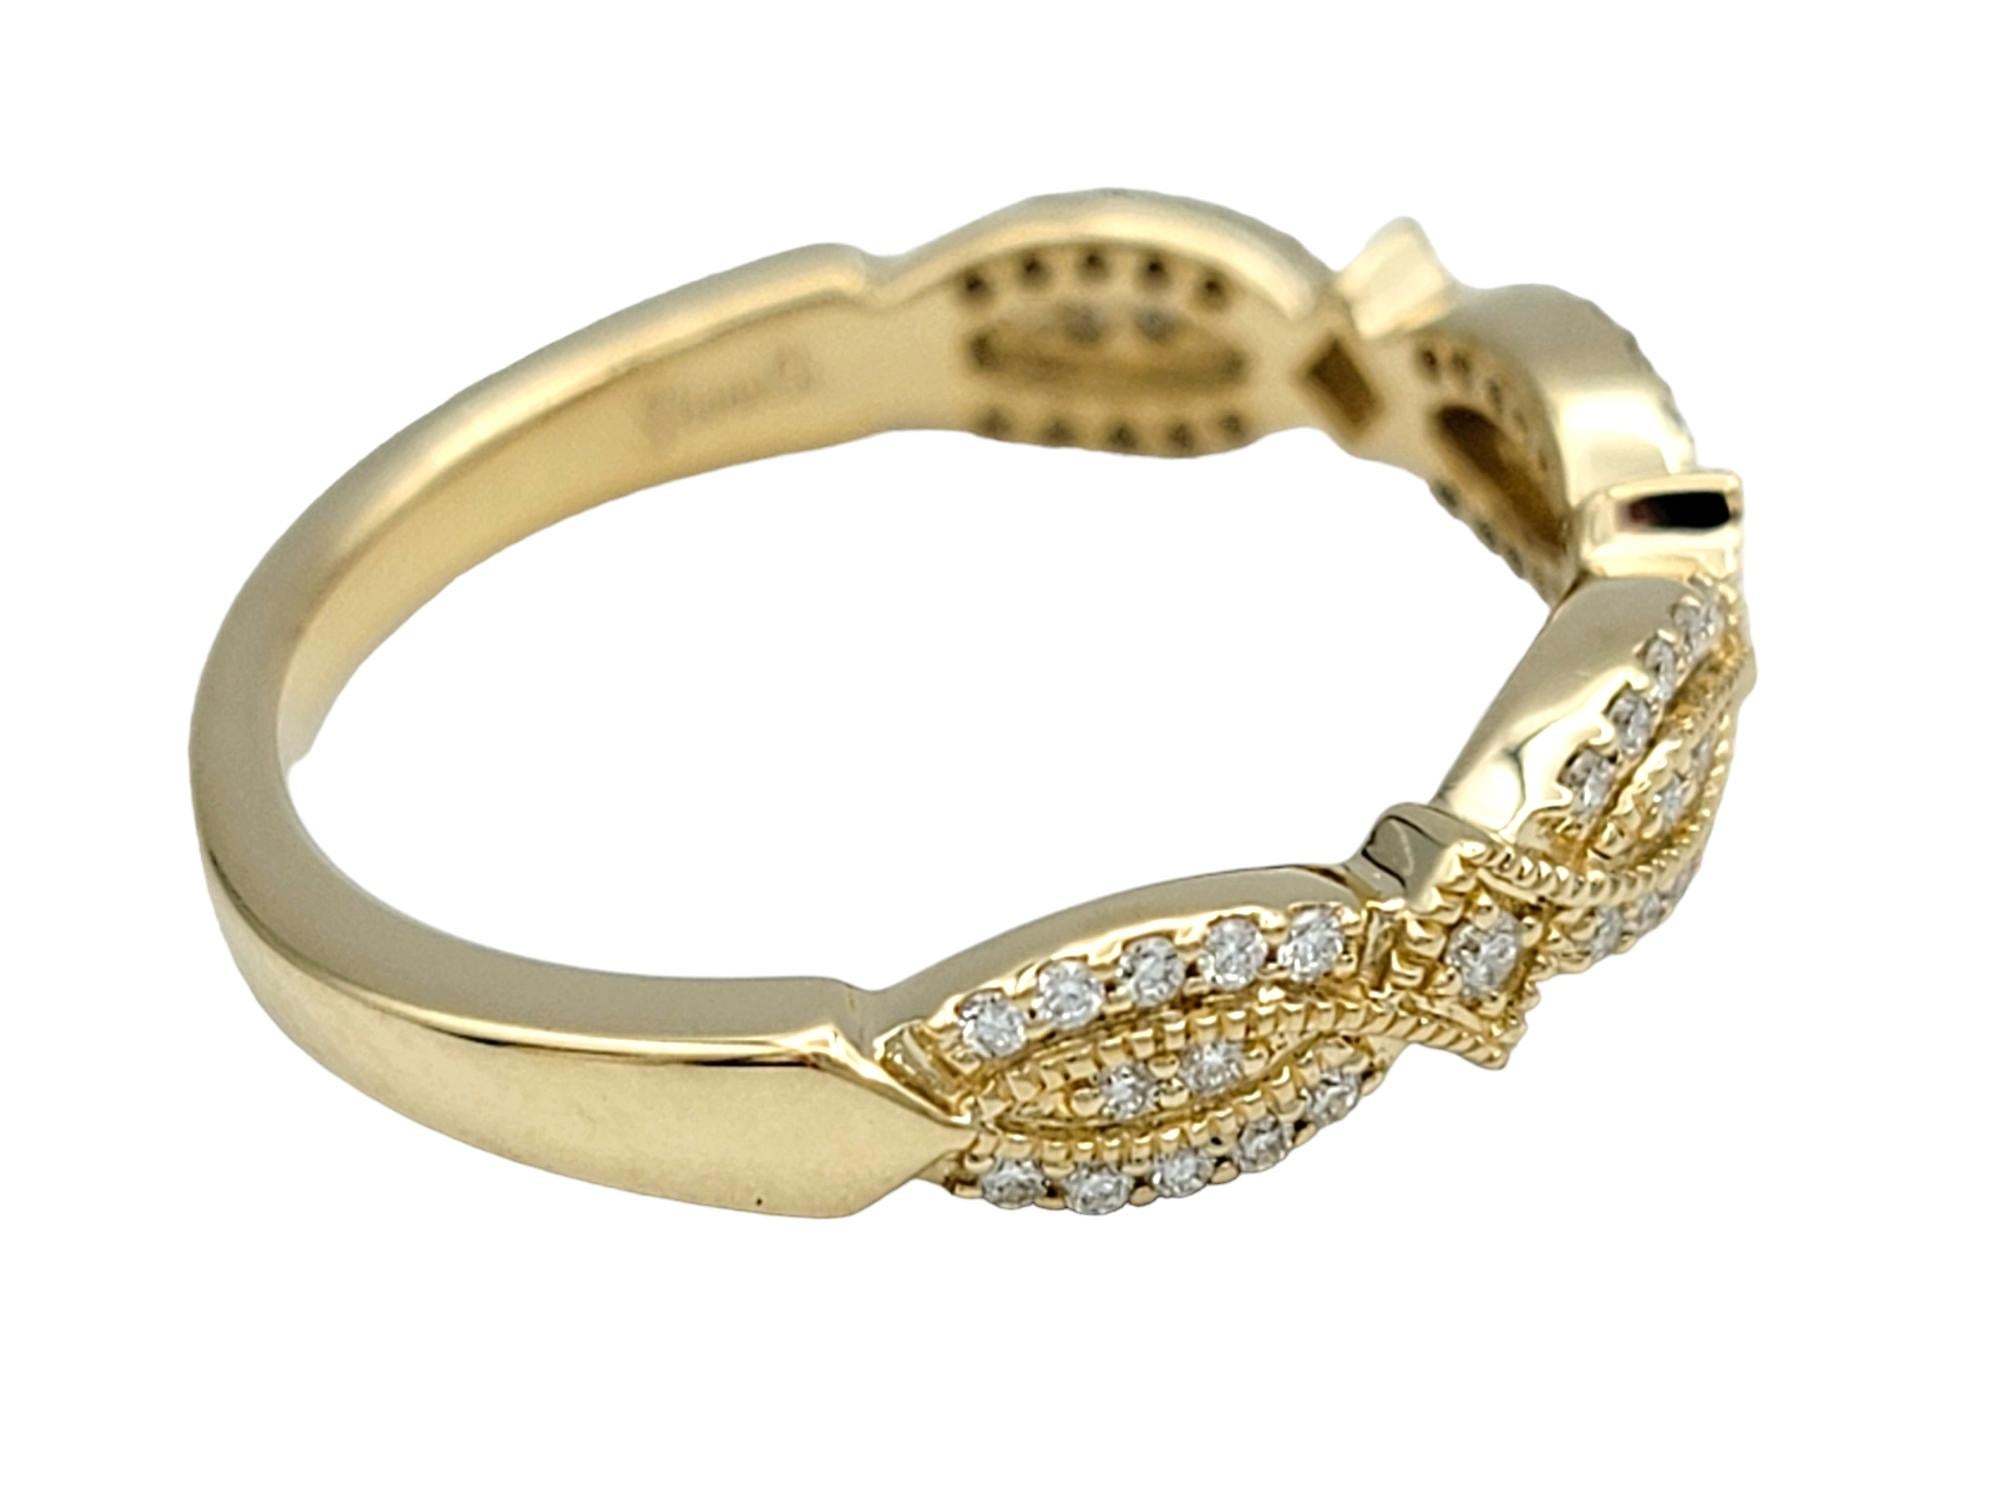 Ring Size: 6

This stunning pavé diamond band ring features a twisted design, crafted in luxurious 14 karat yellow gold. The intertwining style creates an intricate and dynamic look, adding a touch of elegance and sophistication to any